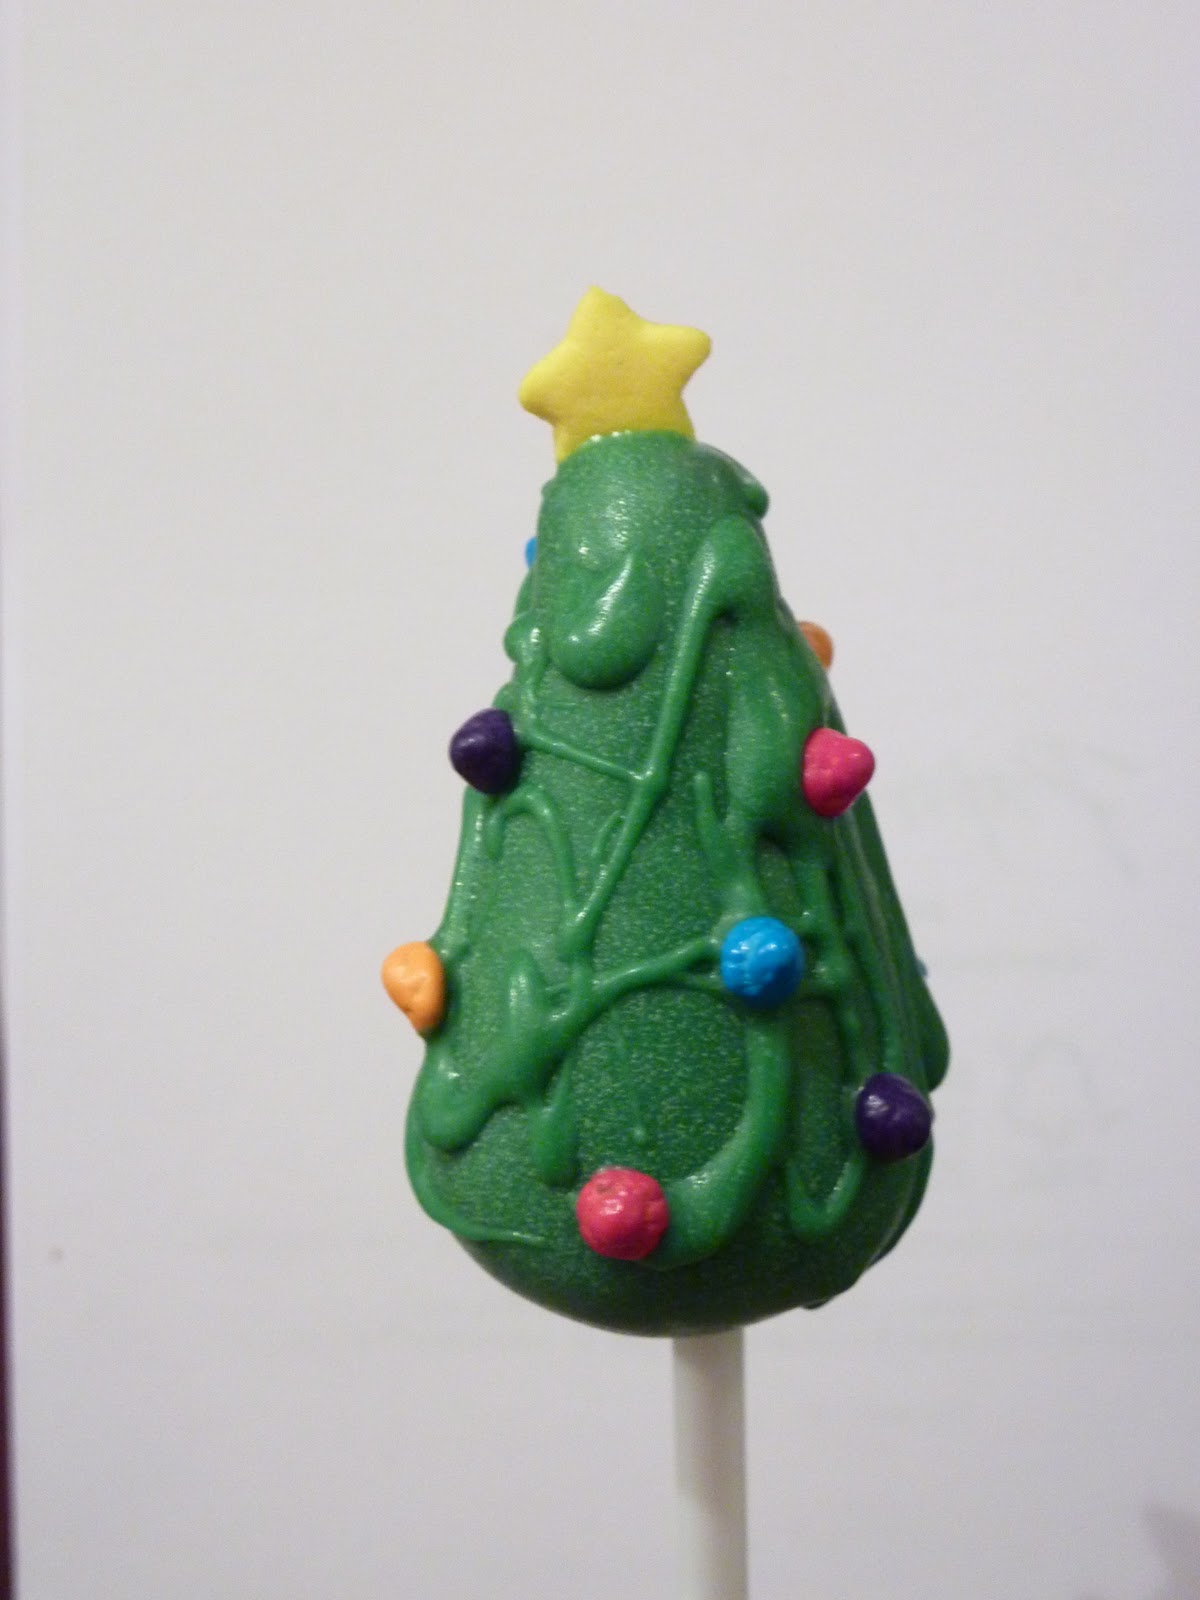 Please Do Not Feed The Animals!: Cake Pops 2 - Christmas Trees.